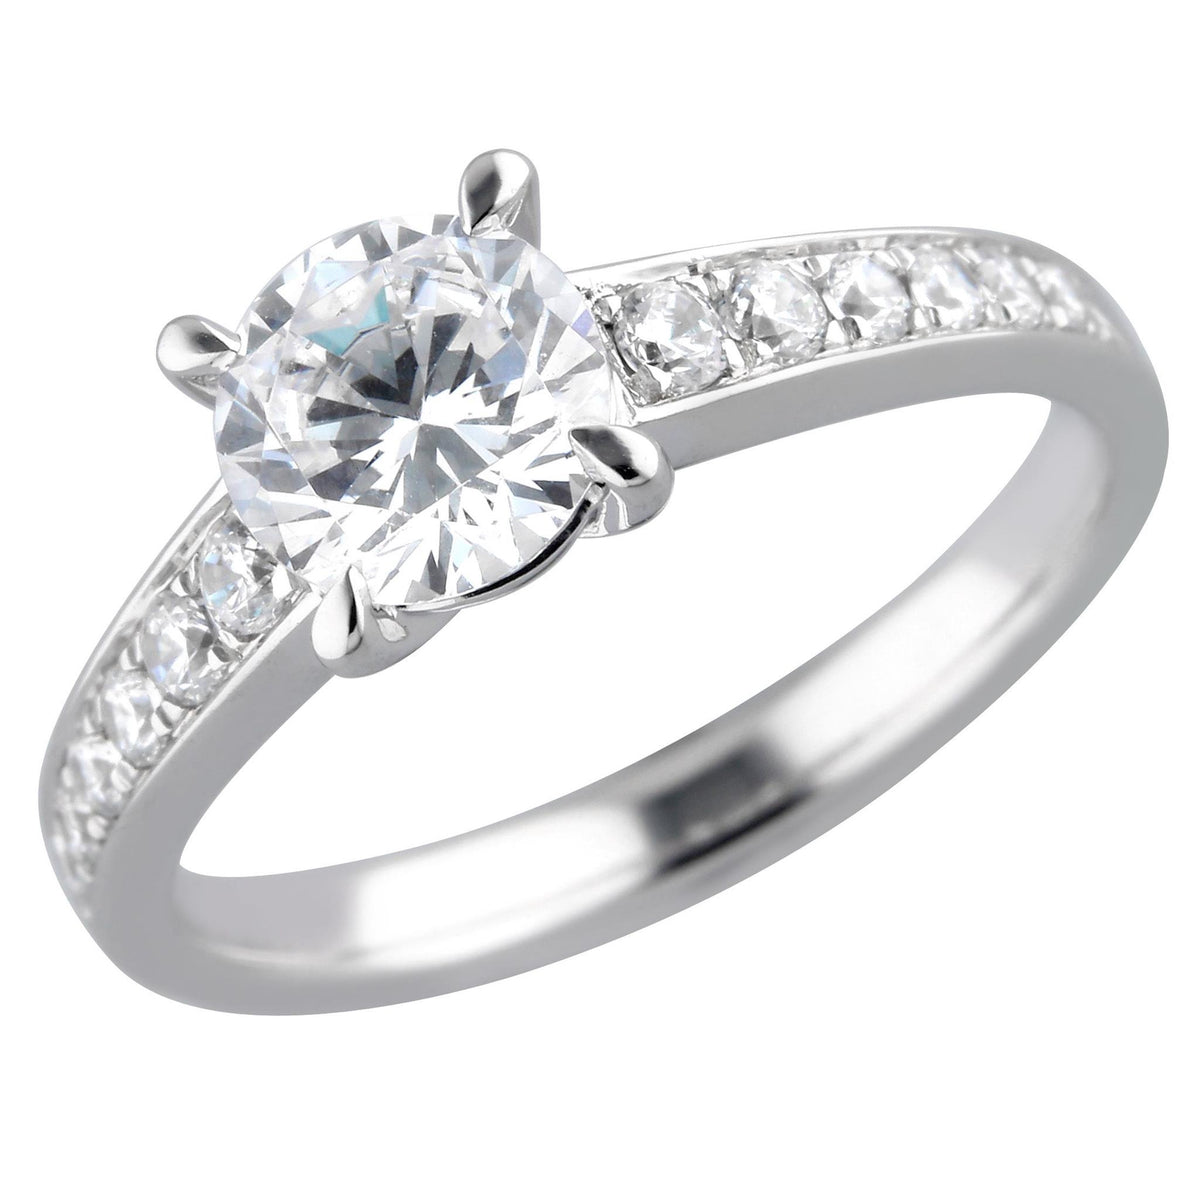 18Kt White Gold Classic Prong Engagement Ring Mounting With 0.25cttw Natural Diamonds